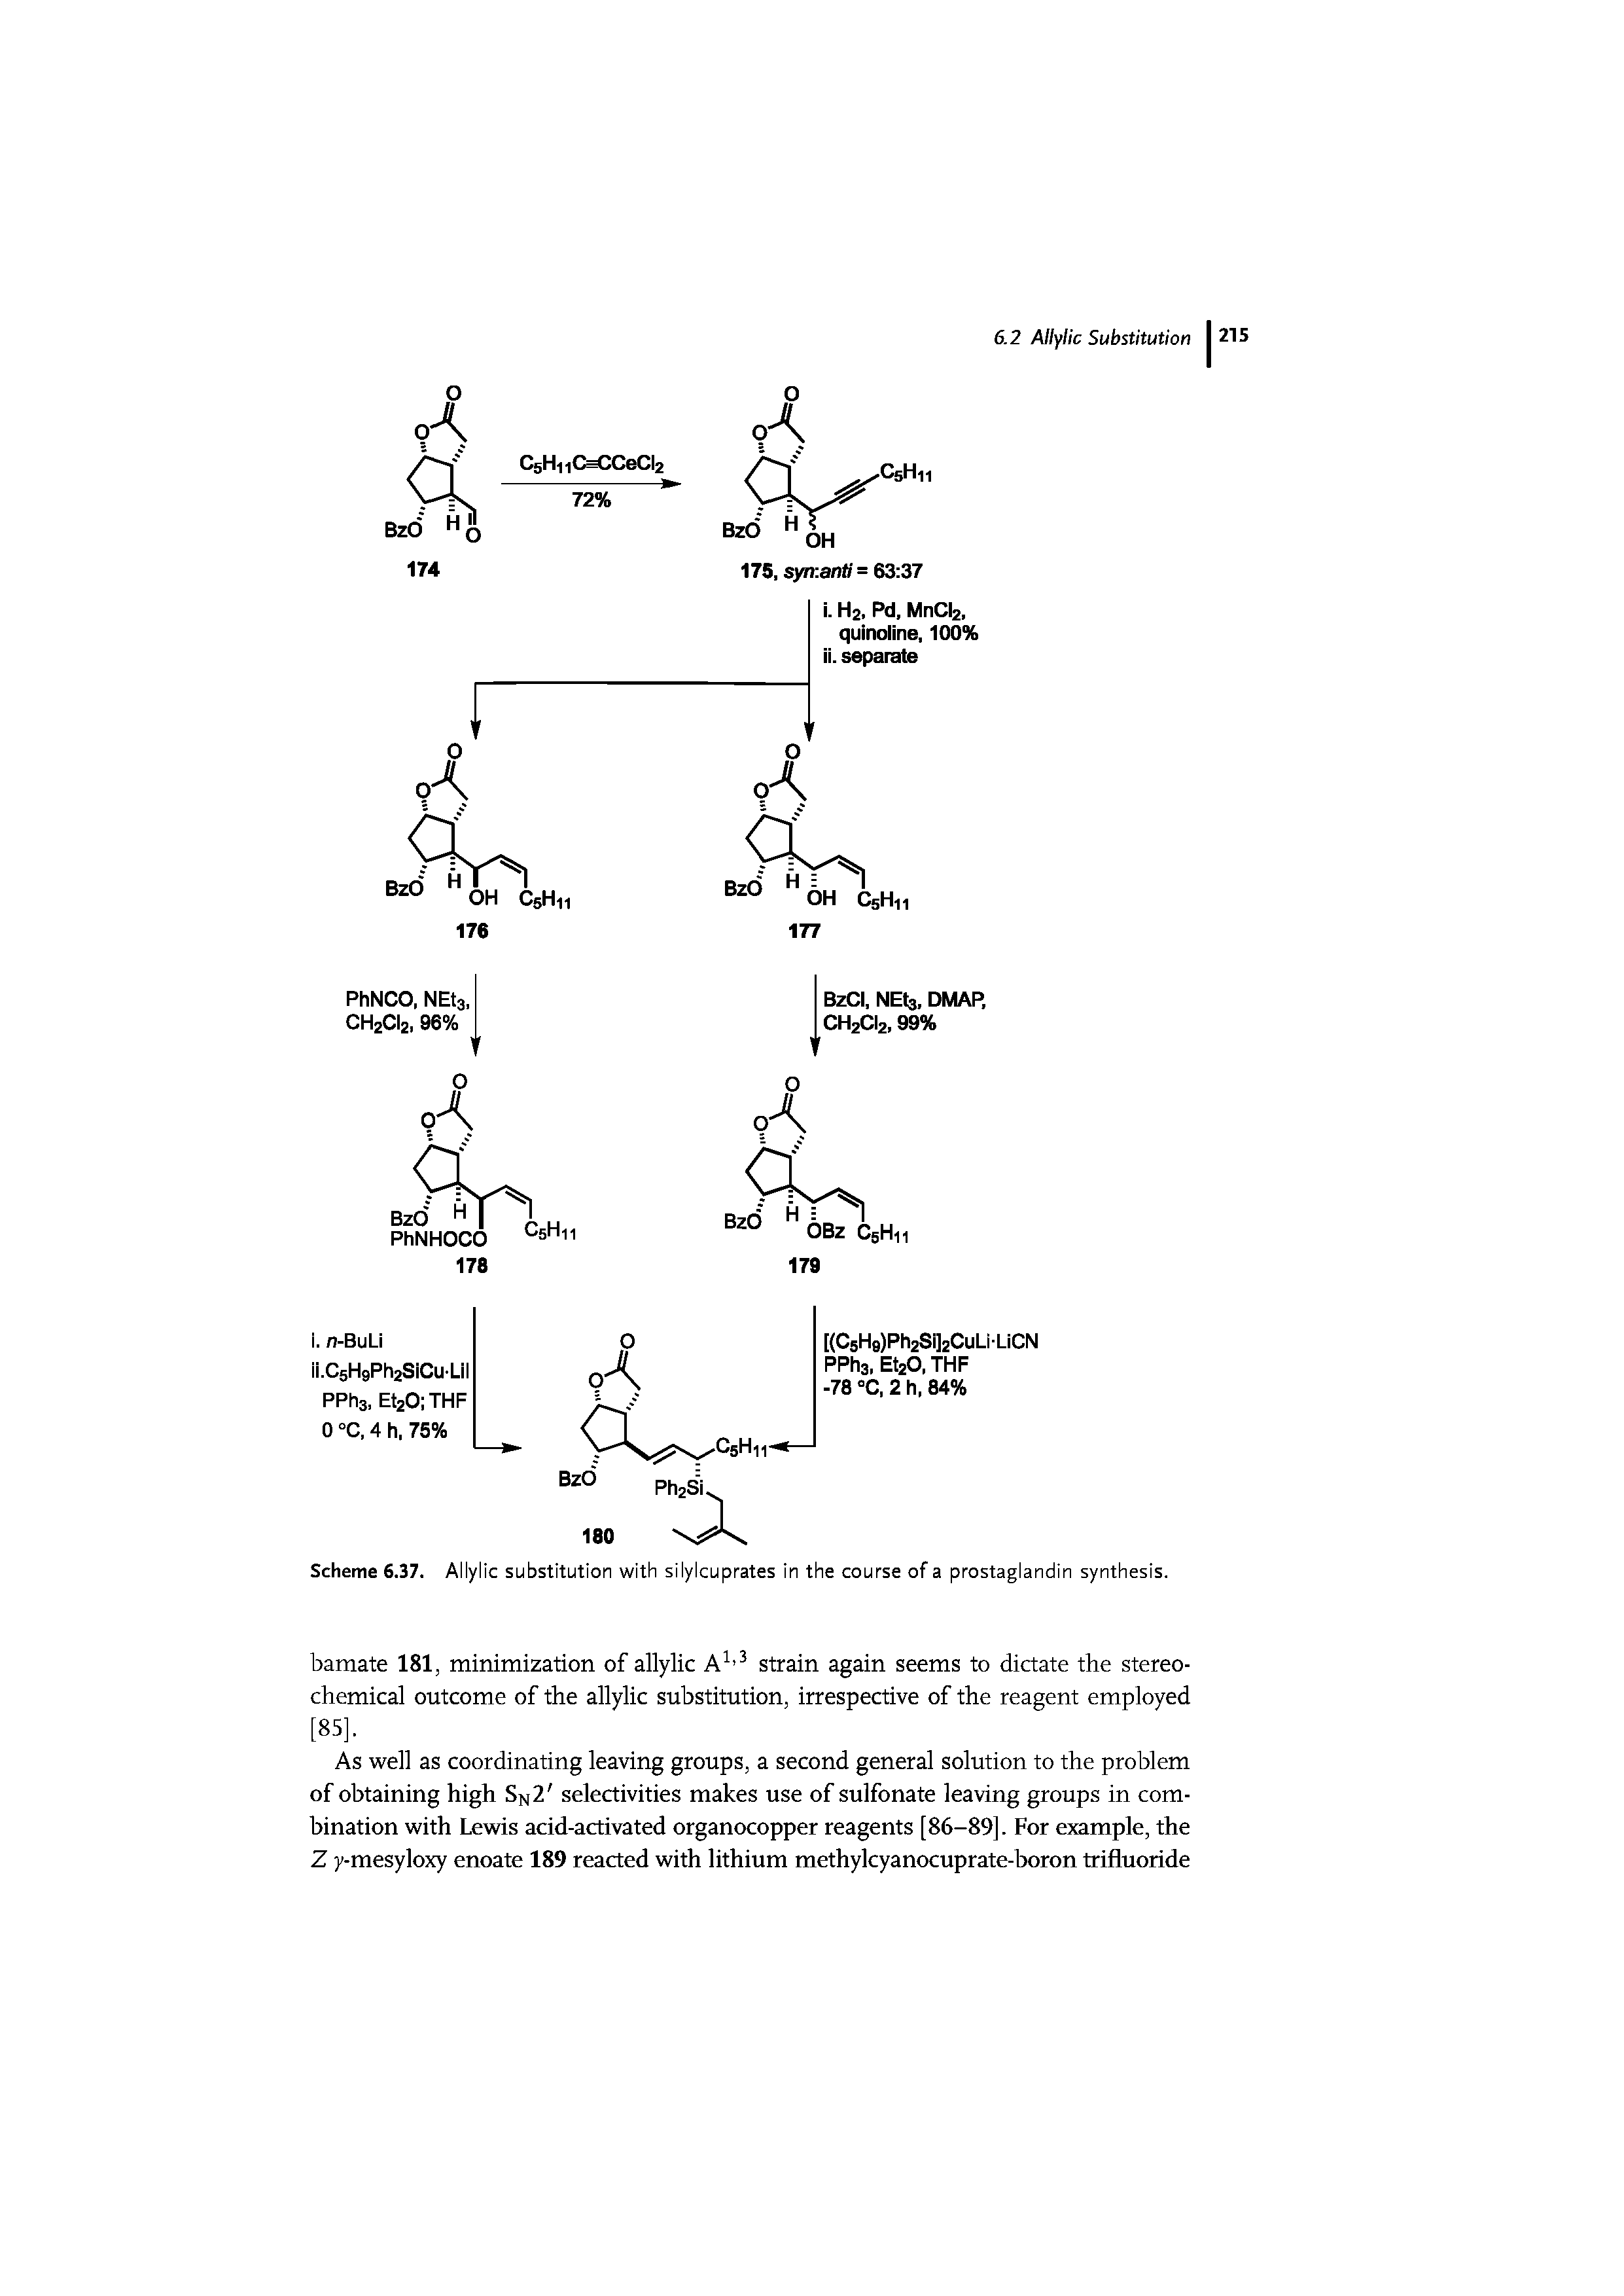 Scheme 6.37. Allylic substitution with silylcuprates in the course of a prostaglandin synthesis.